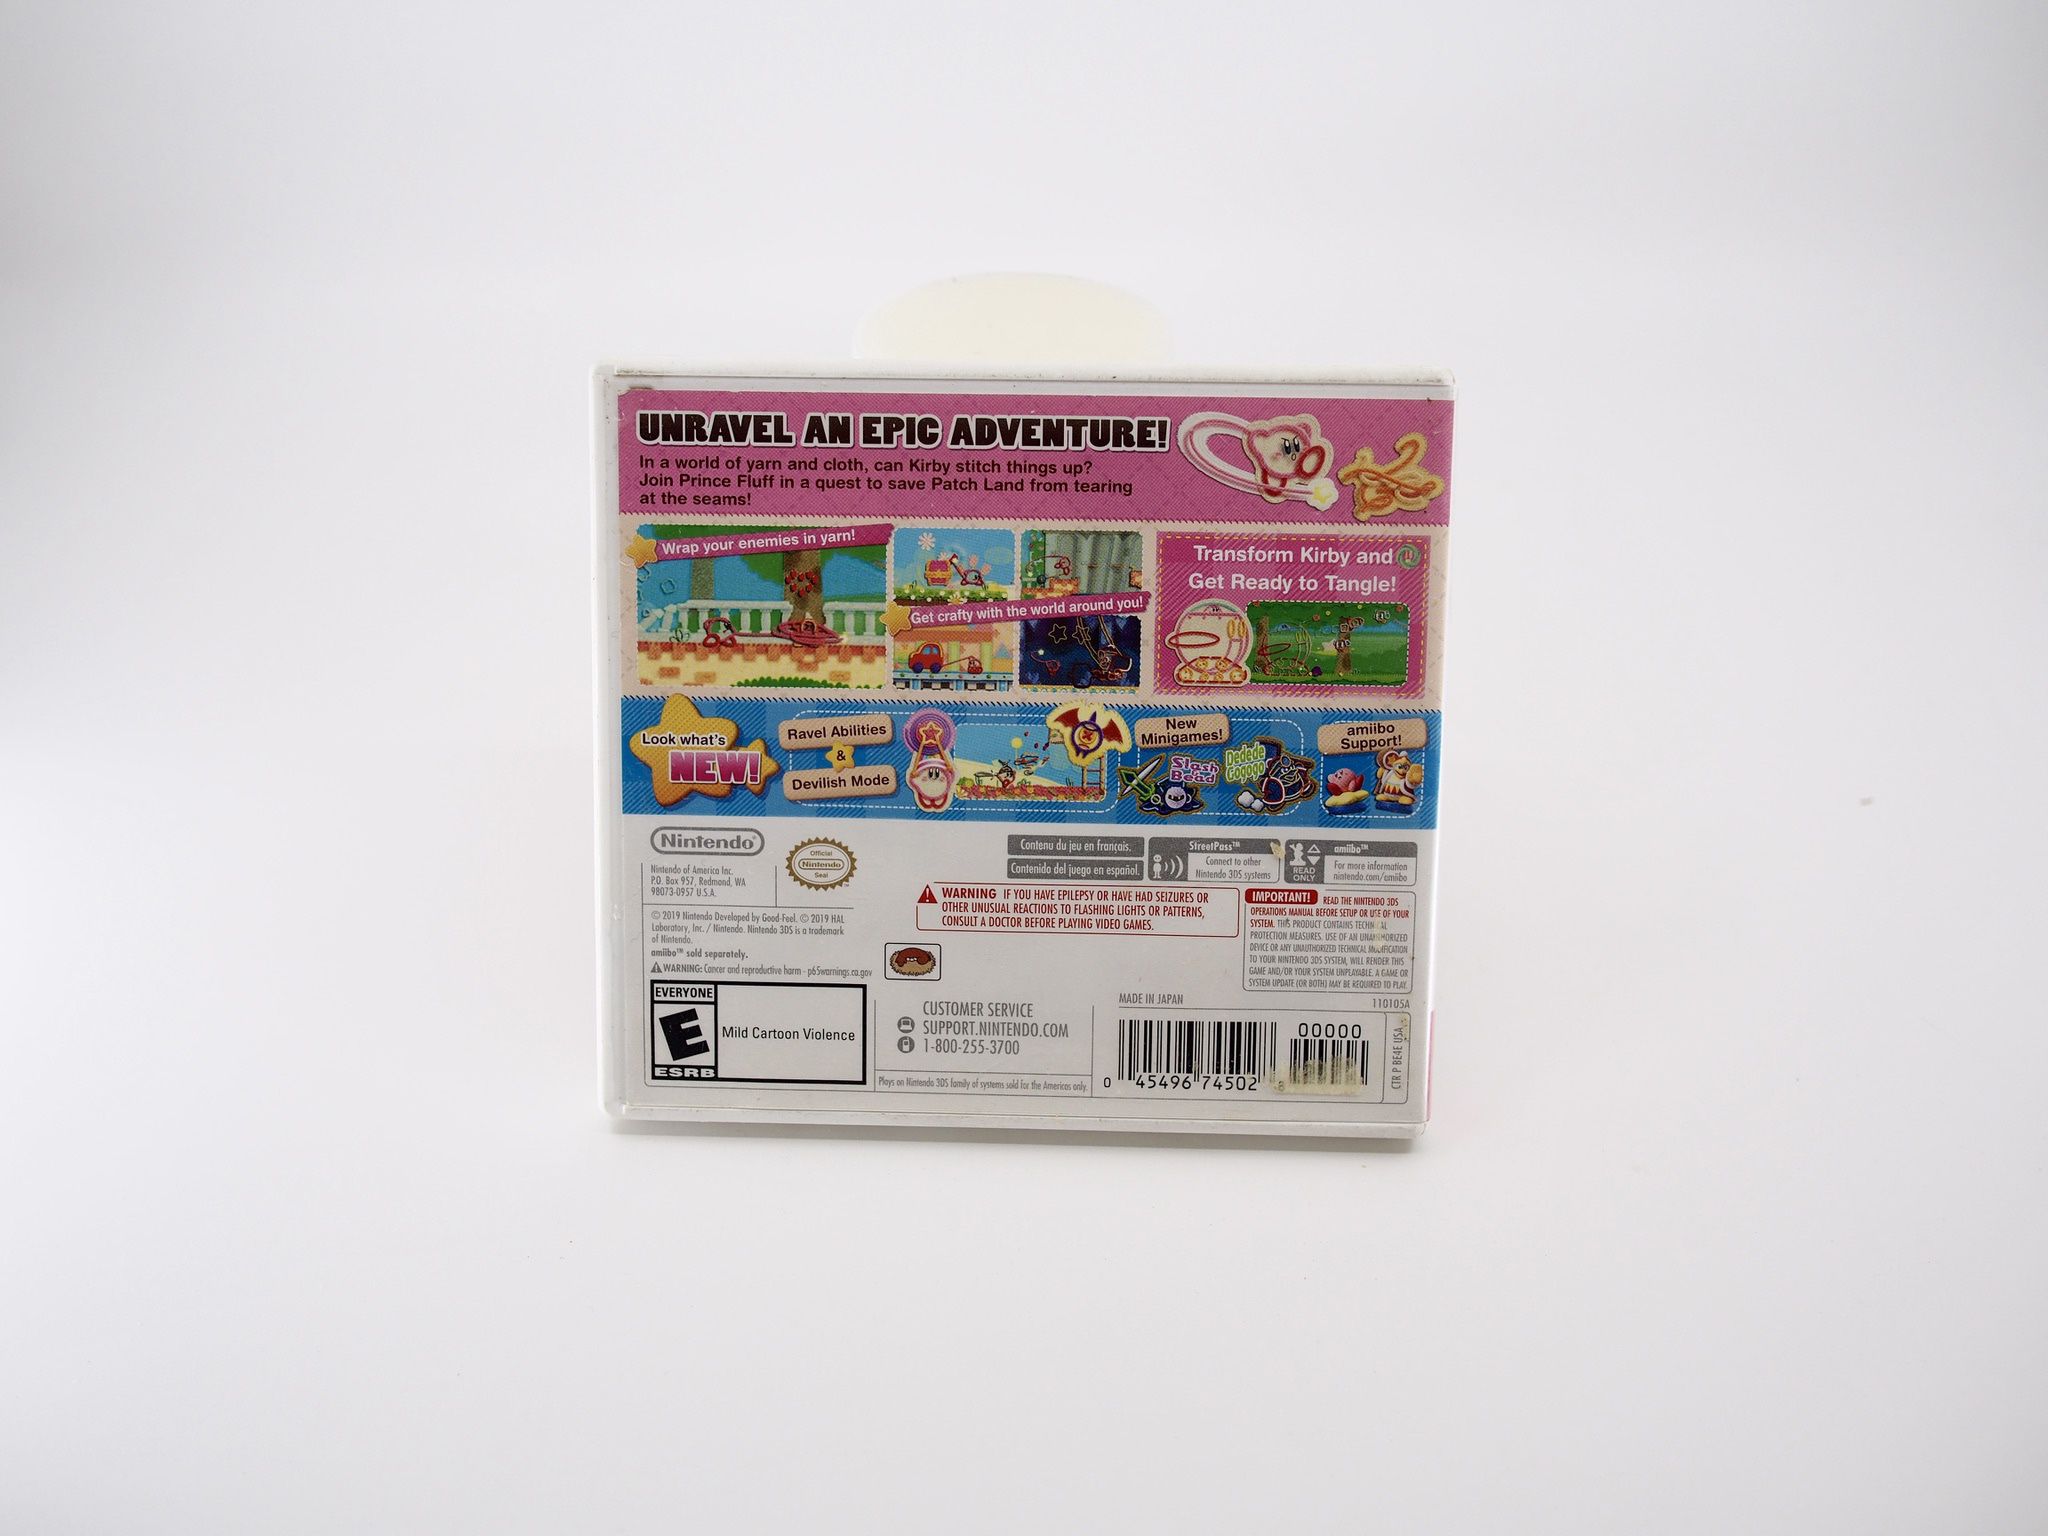 Kirby Extra Epic Yarn 3ds